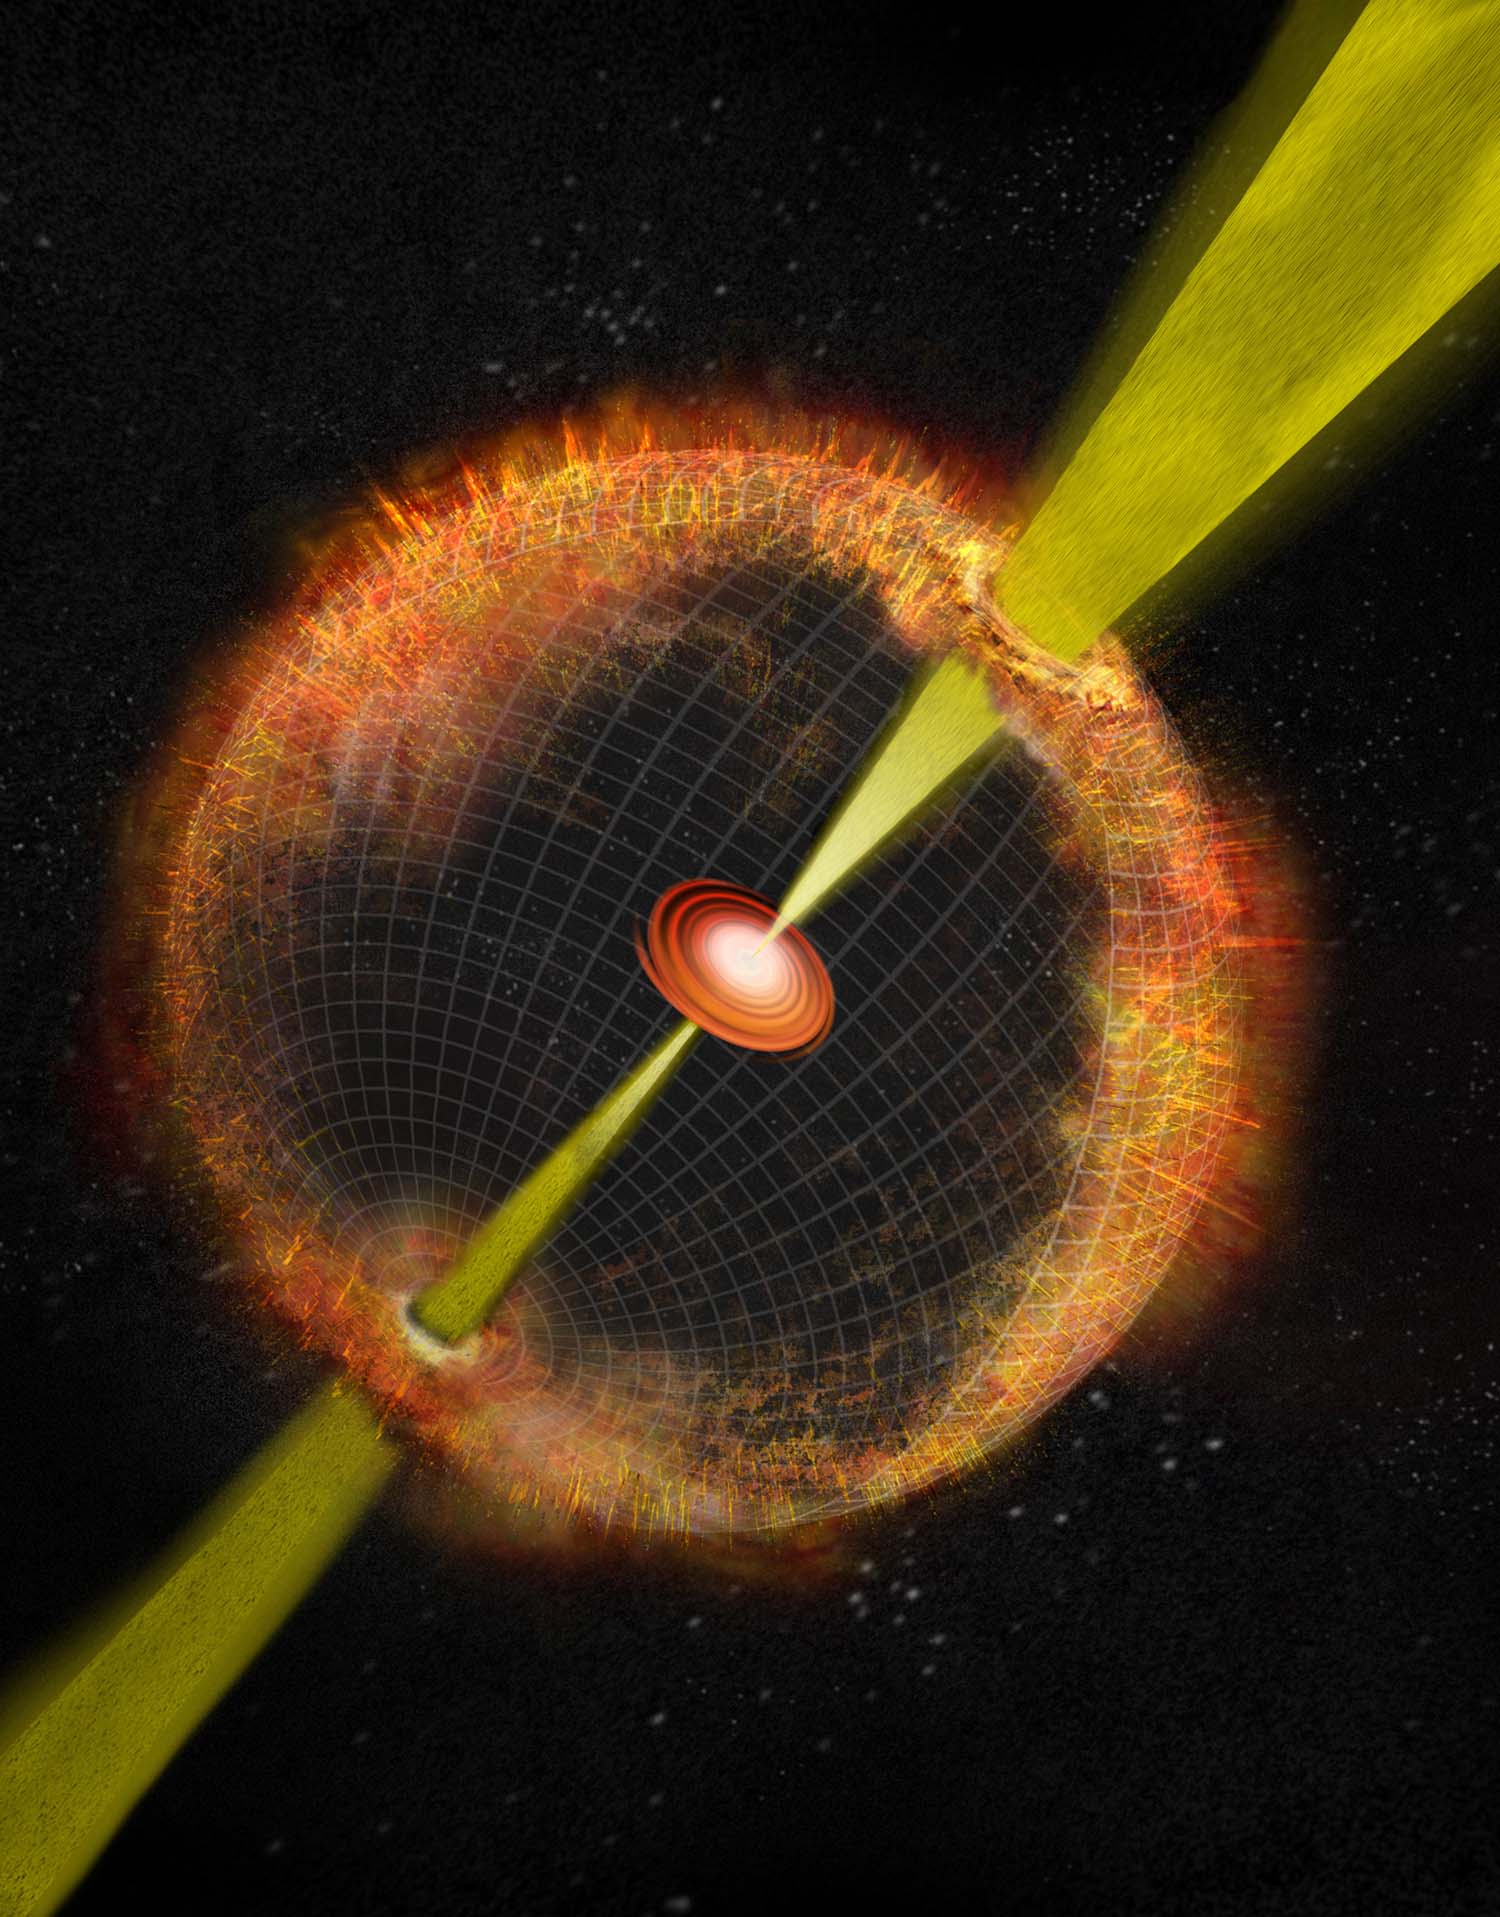 engine-driven-supernova-explosion-with-accretion-disk.jpg